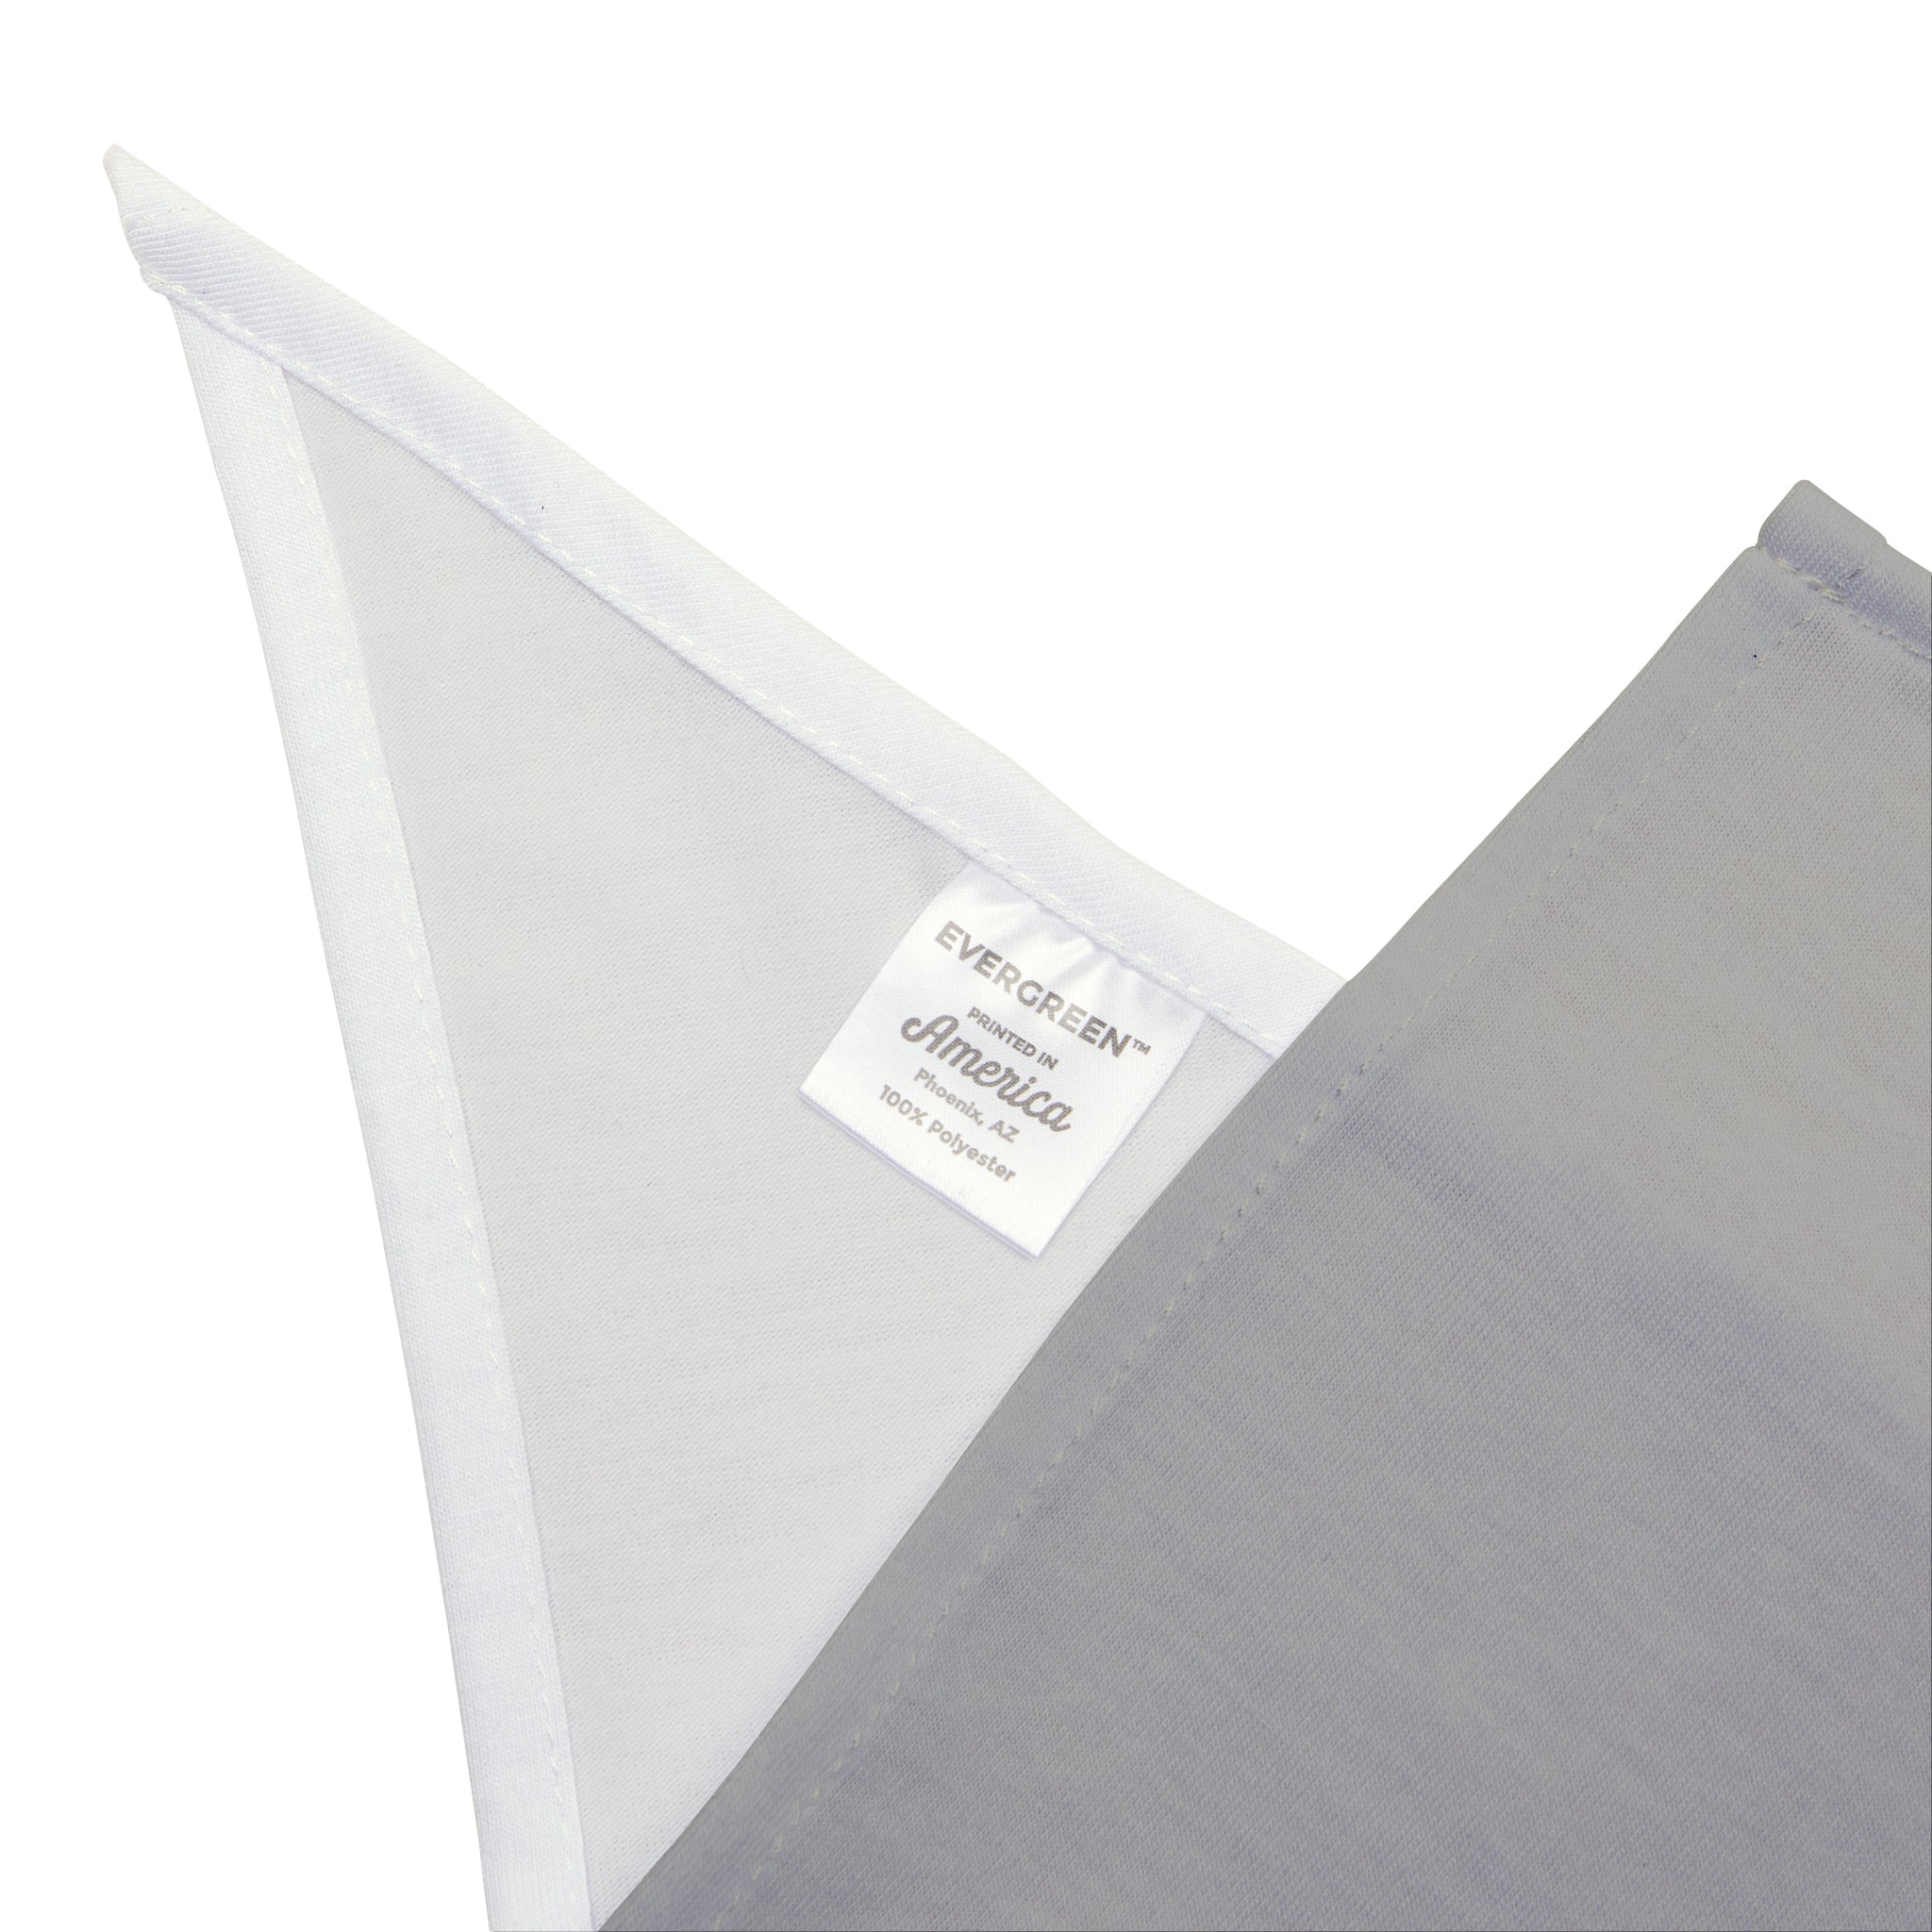 Close-up of a light grey fabric with a white triangular corner, reminiscent of the soft-spun polyester used in Mocha - Pet Bandana. Attached tag reads "EVERGREEN America 100% polyester.